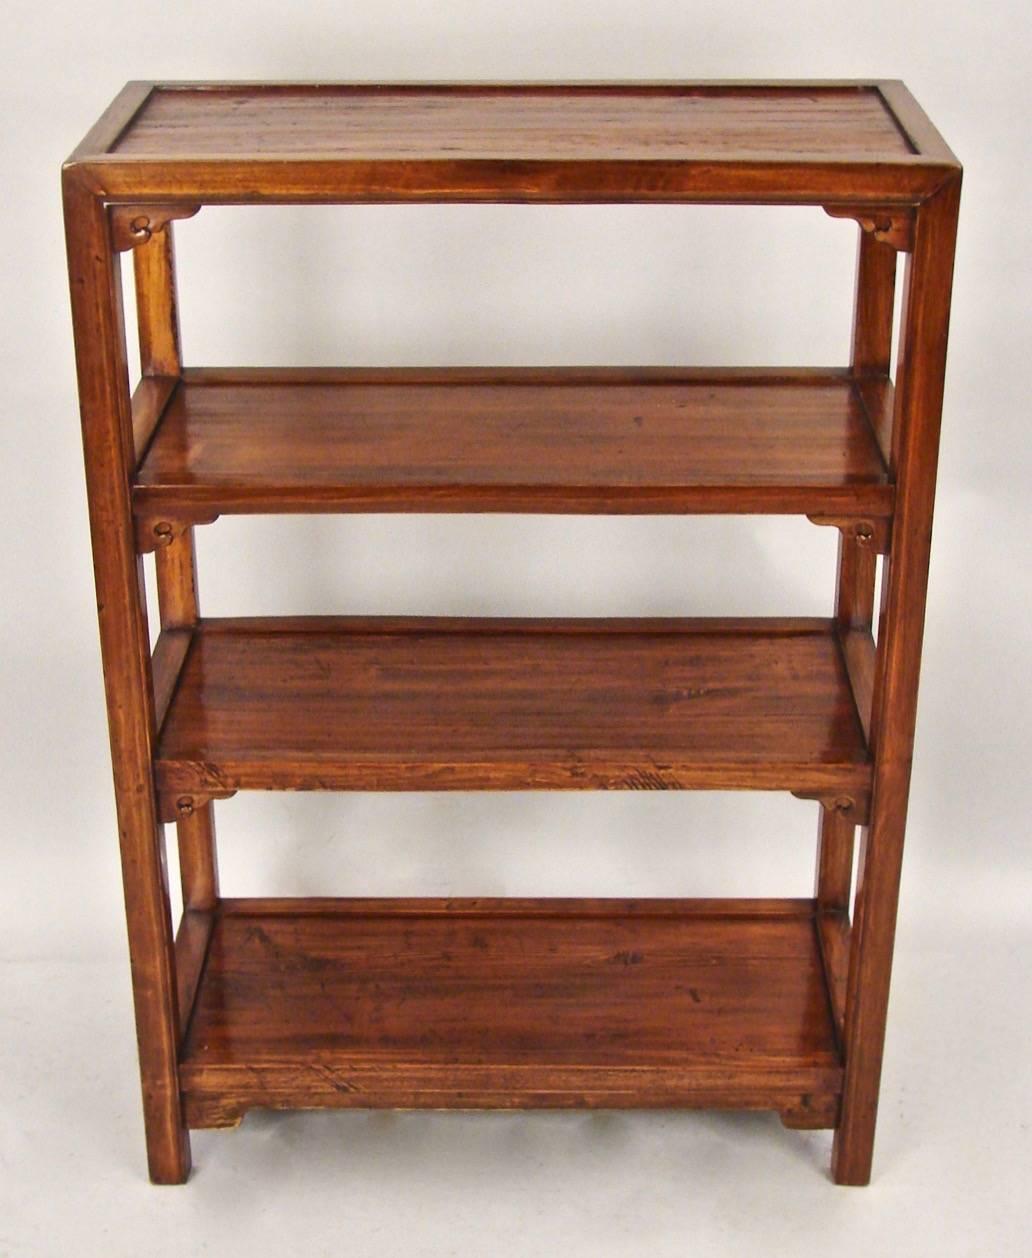 An attractive and useful small-scale Chinese bookcase, the inset top above three additional shelves, each with a stylized bracket, the shelves made of well-figured elm with a polished surface supported on straight legs, circa 1900-1920.